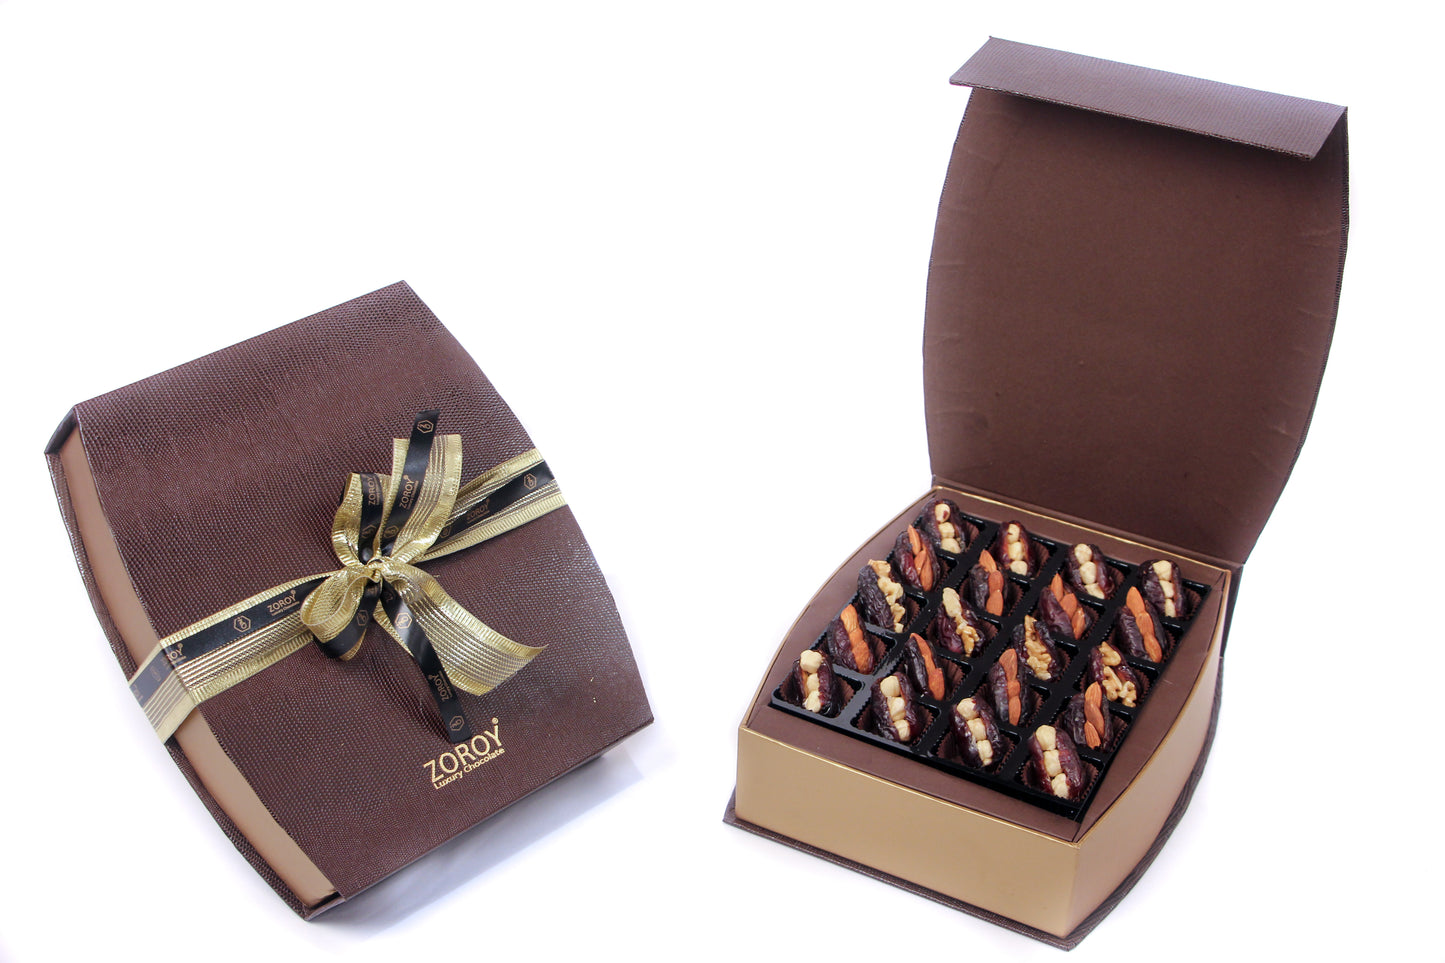 ZOROY Ramzan exclusive Leather finish Dates with Dry Fruits Box of 20 - 260 Gms